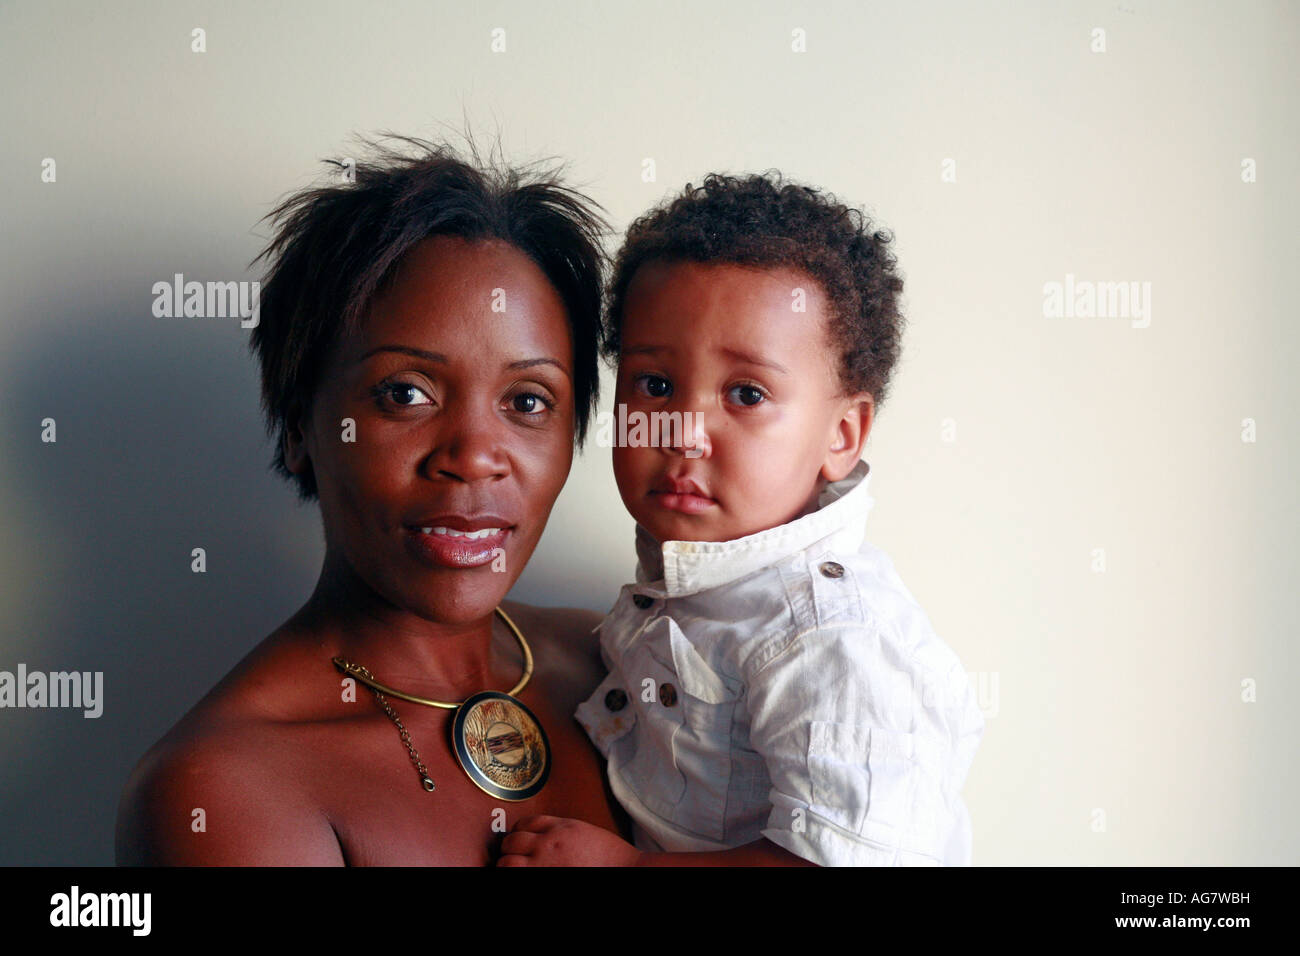 united kingdom london portrait of black mother with her mixed race son Stock Photo